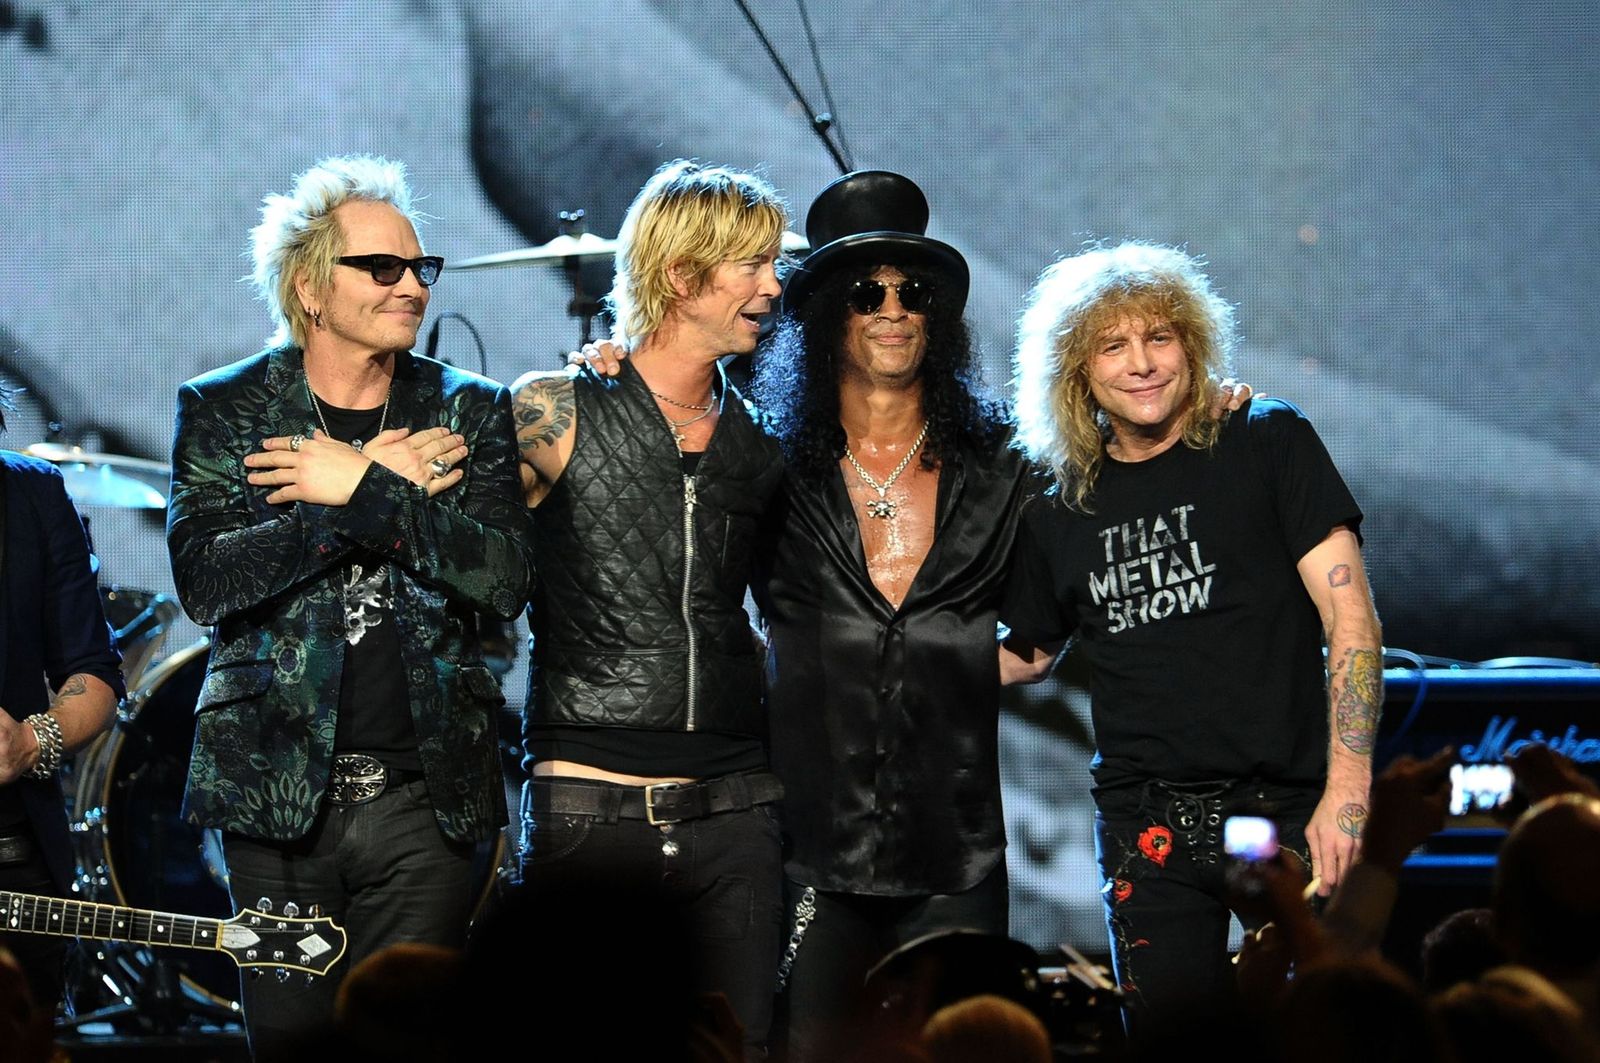 Matt Sorum, Duff McKagan, Slash and Steven Adler of Guns N' Roses, perform onstage during the 27th Annual Rock And Roll Hall of Fame Induction Ceremony on April 14, 2012 | Photo: Getty Images